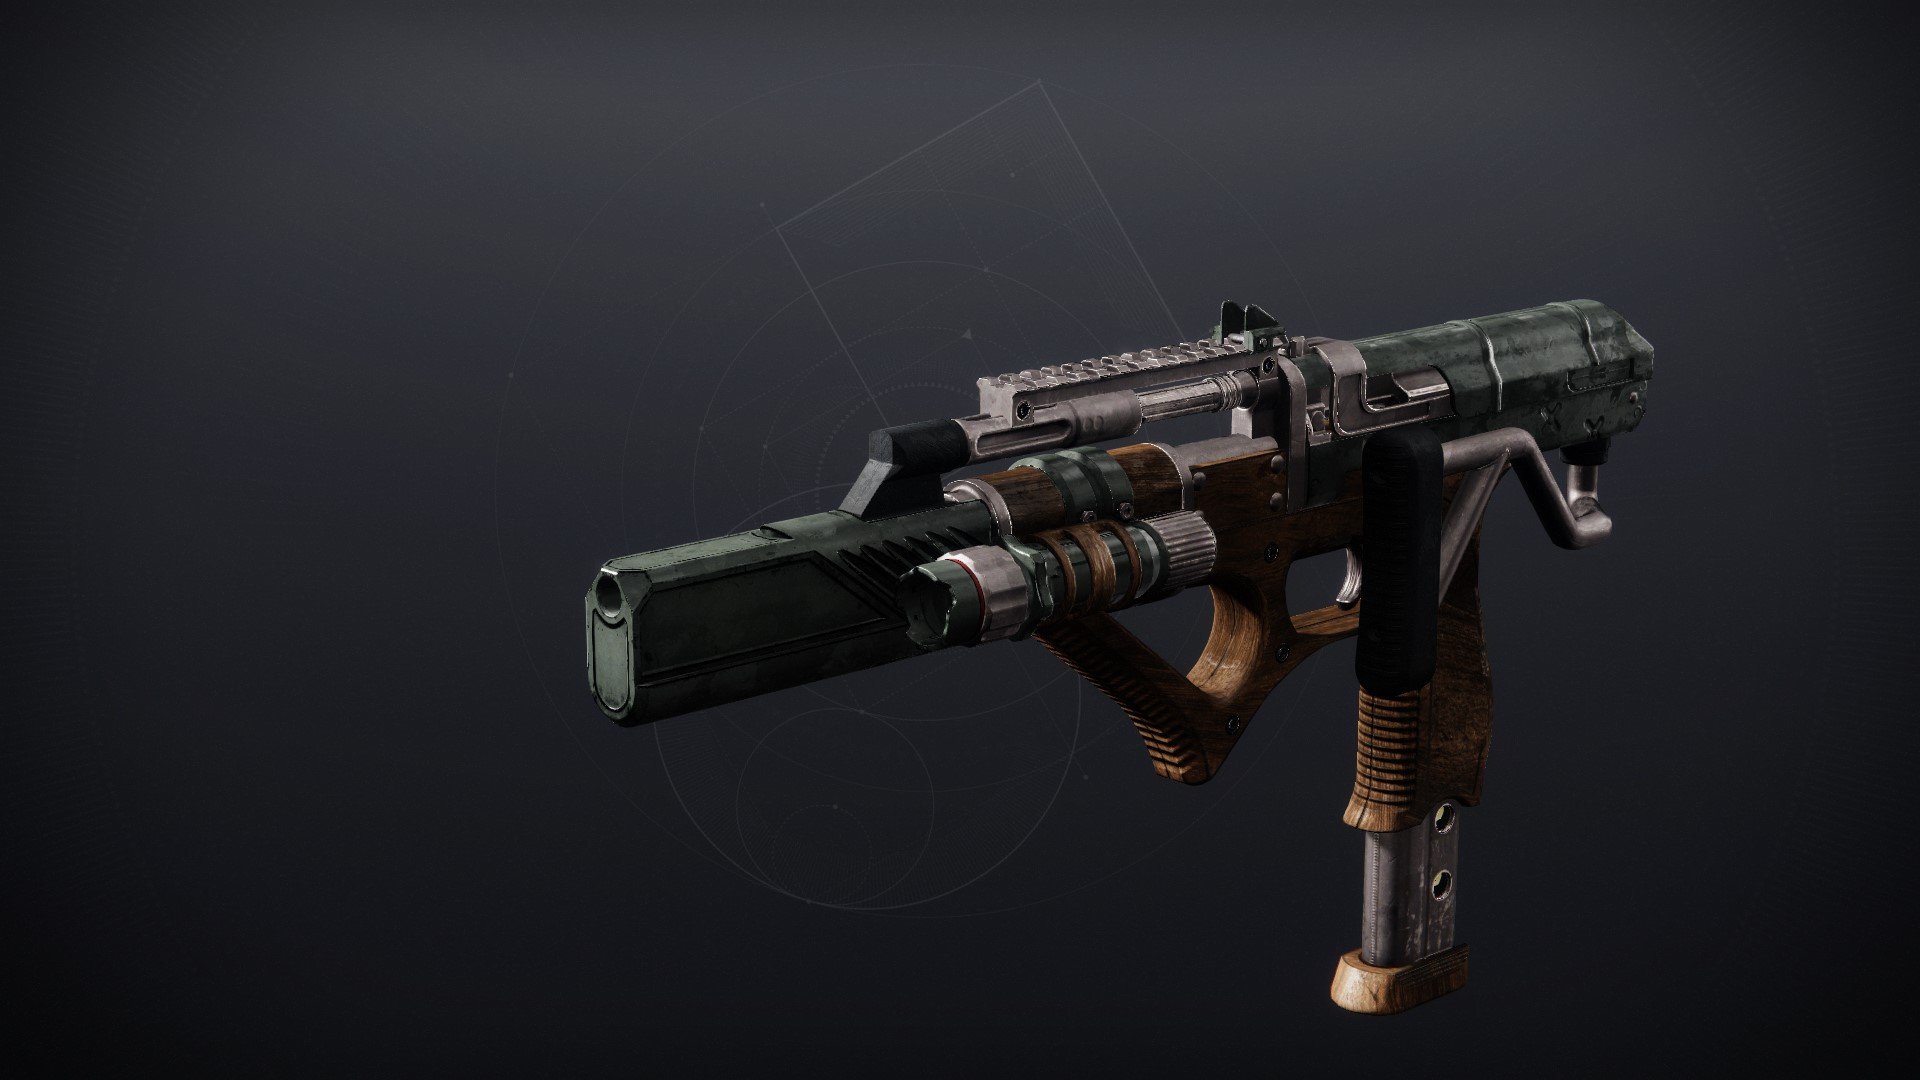 An in-game render of the Parabellum.